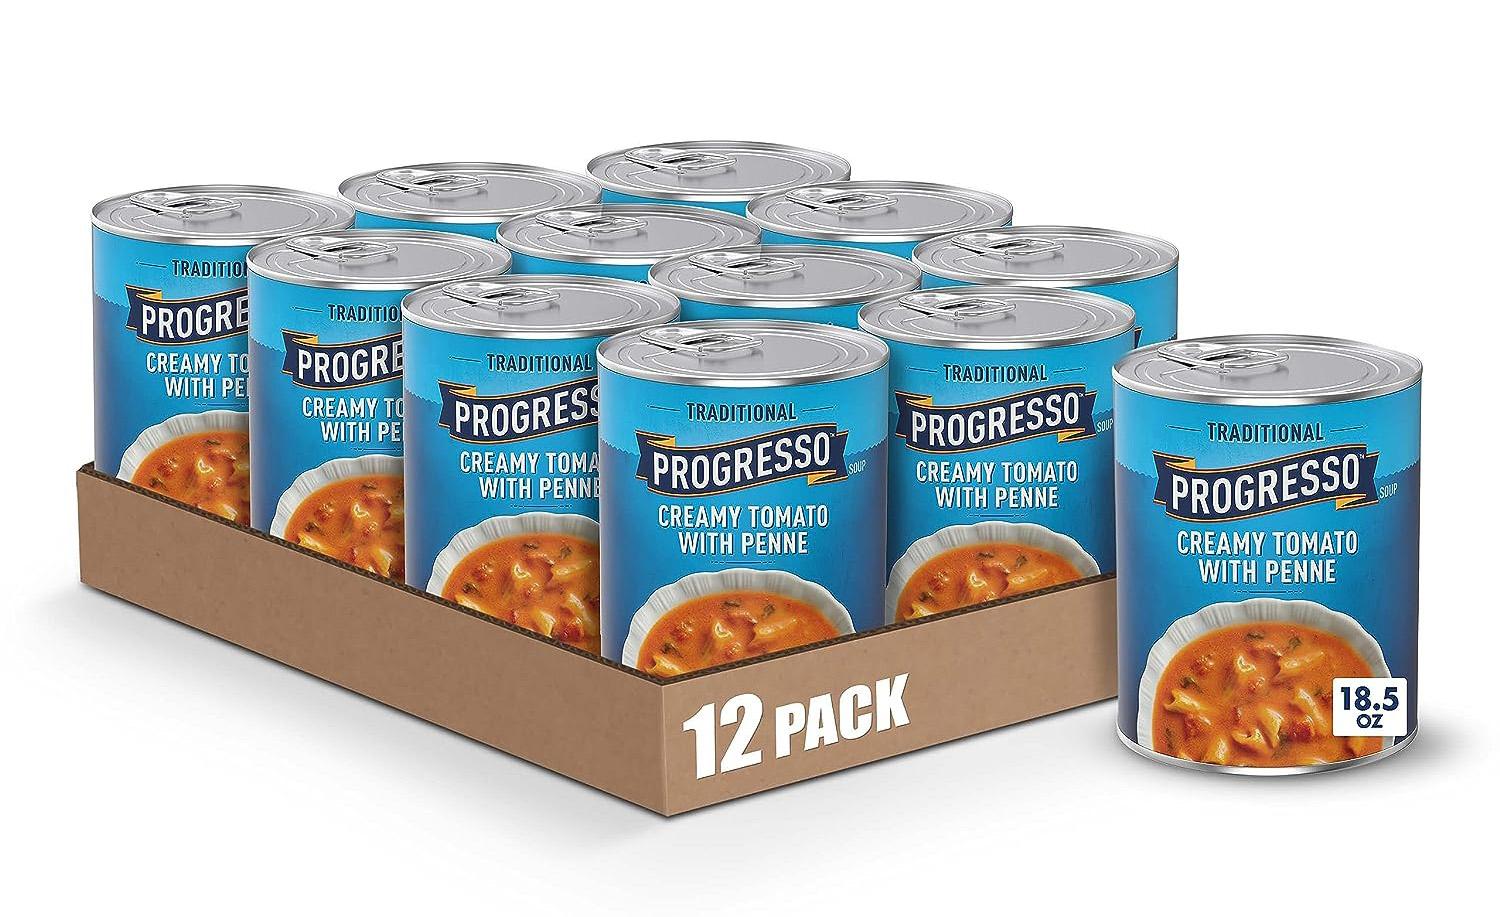 Progresso Traditional Creamy Tomato with Penne Canned Soup 12 Pack for $15.51 Shipped